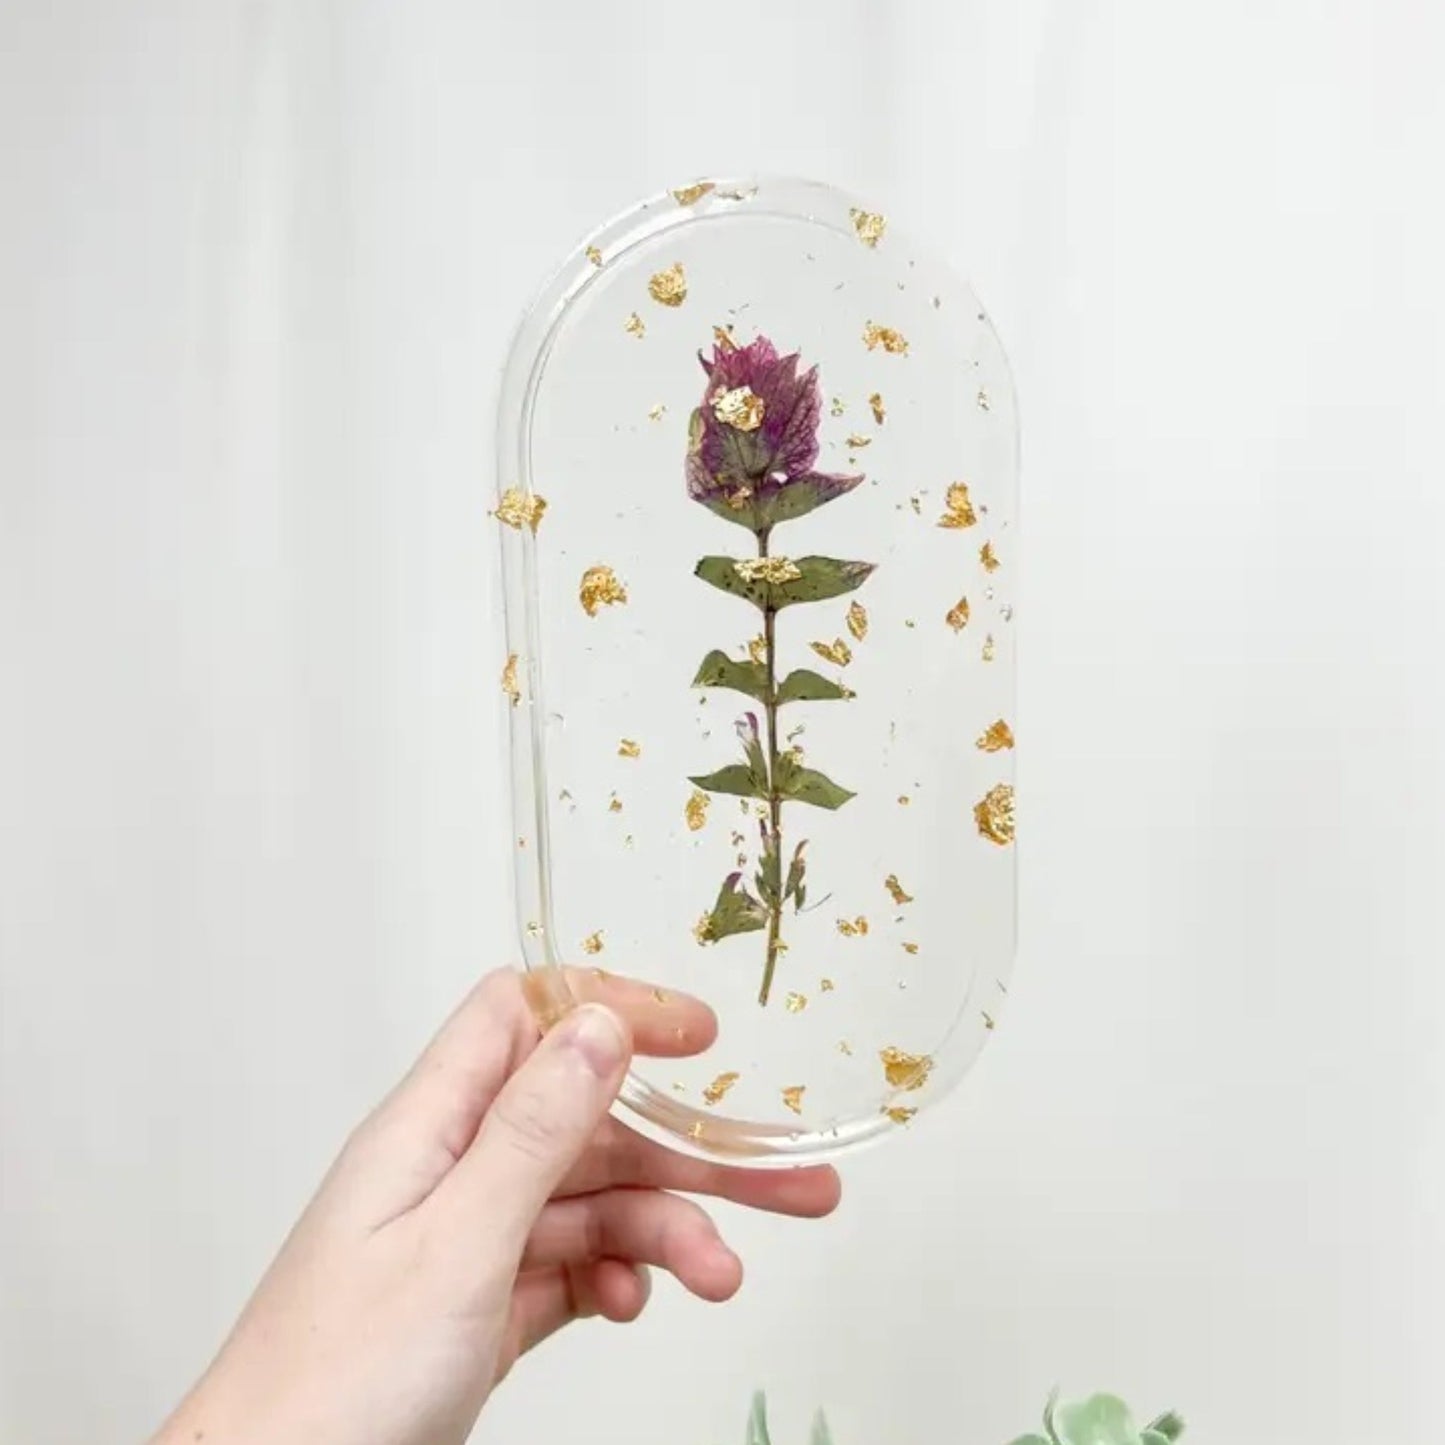 Pressed Flower Trinket Tray - Made in the USA